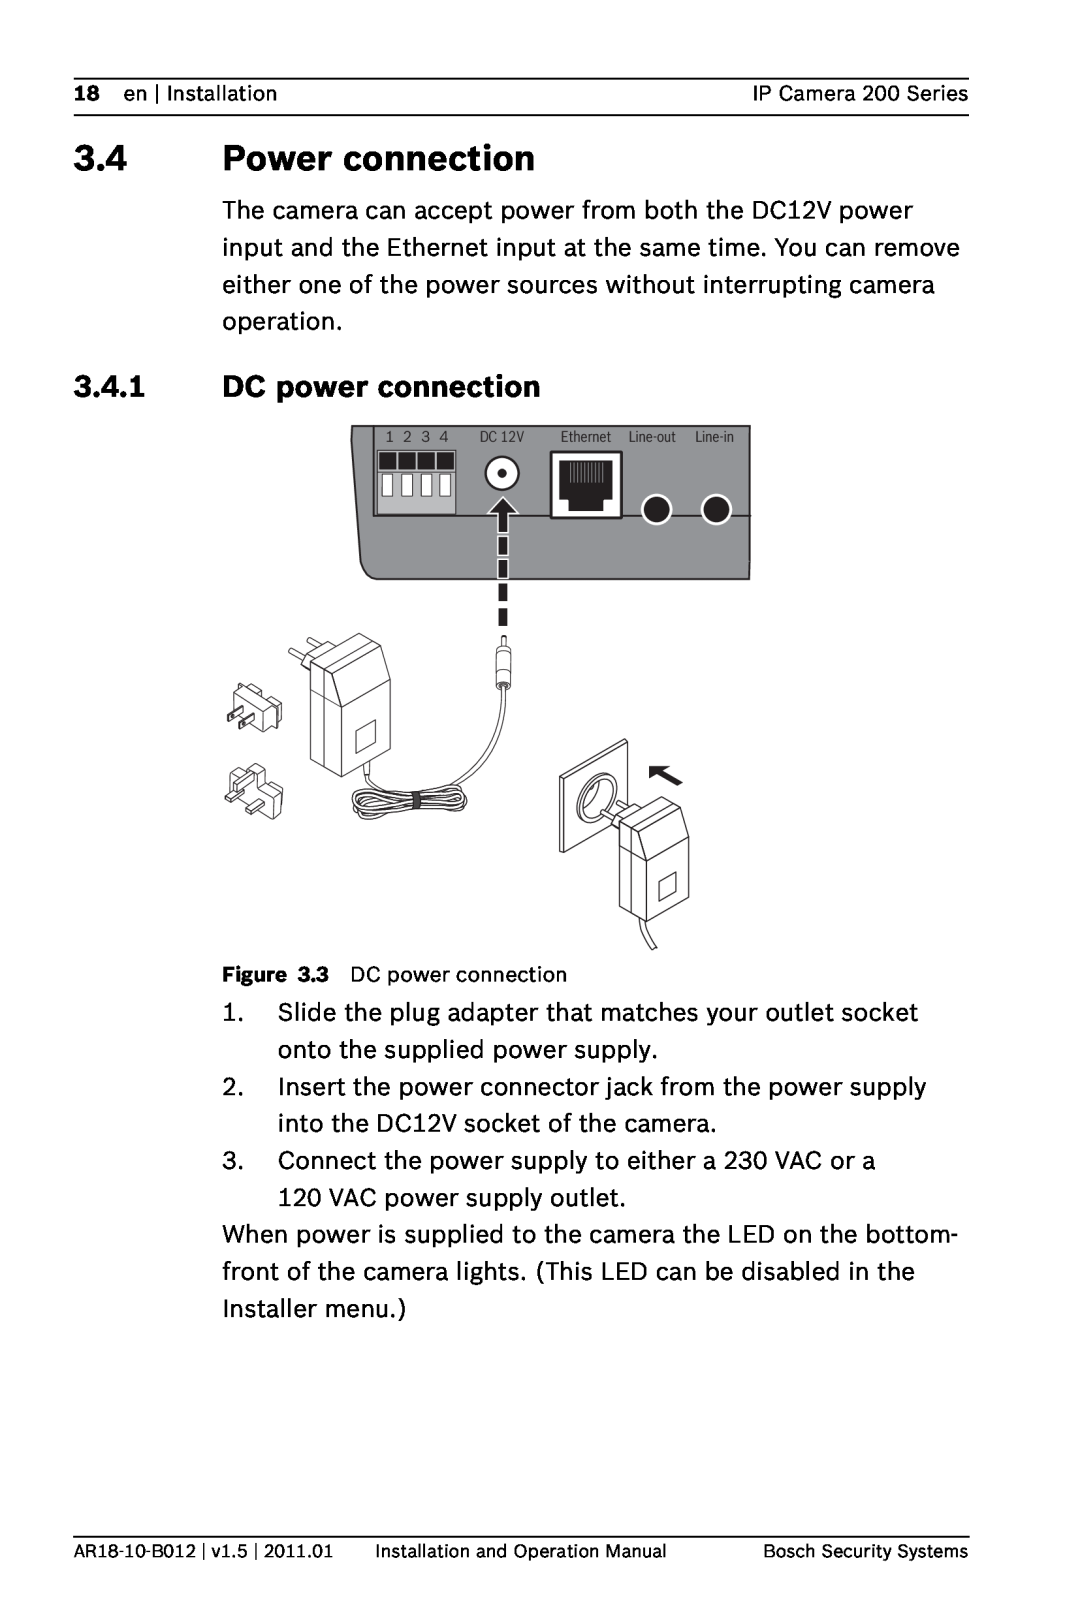 Bosch Appliances NDC-265-P operation manual Power connection, DC power connection 